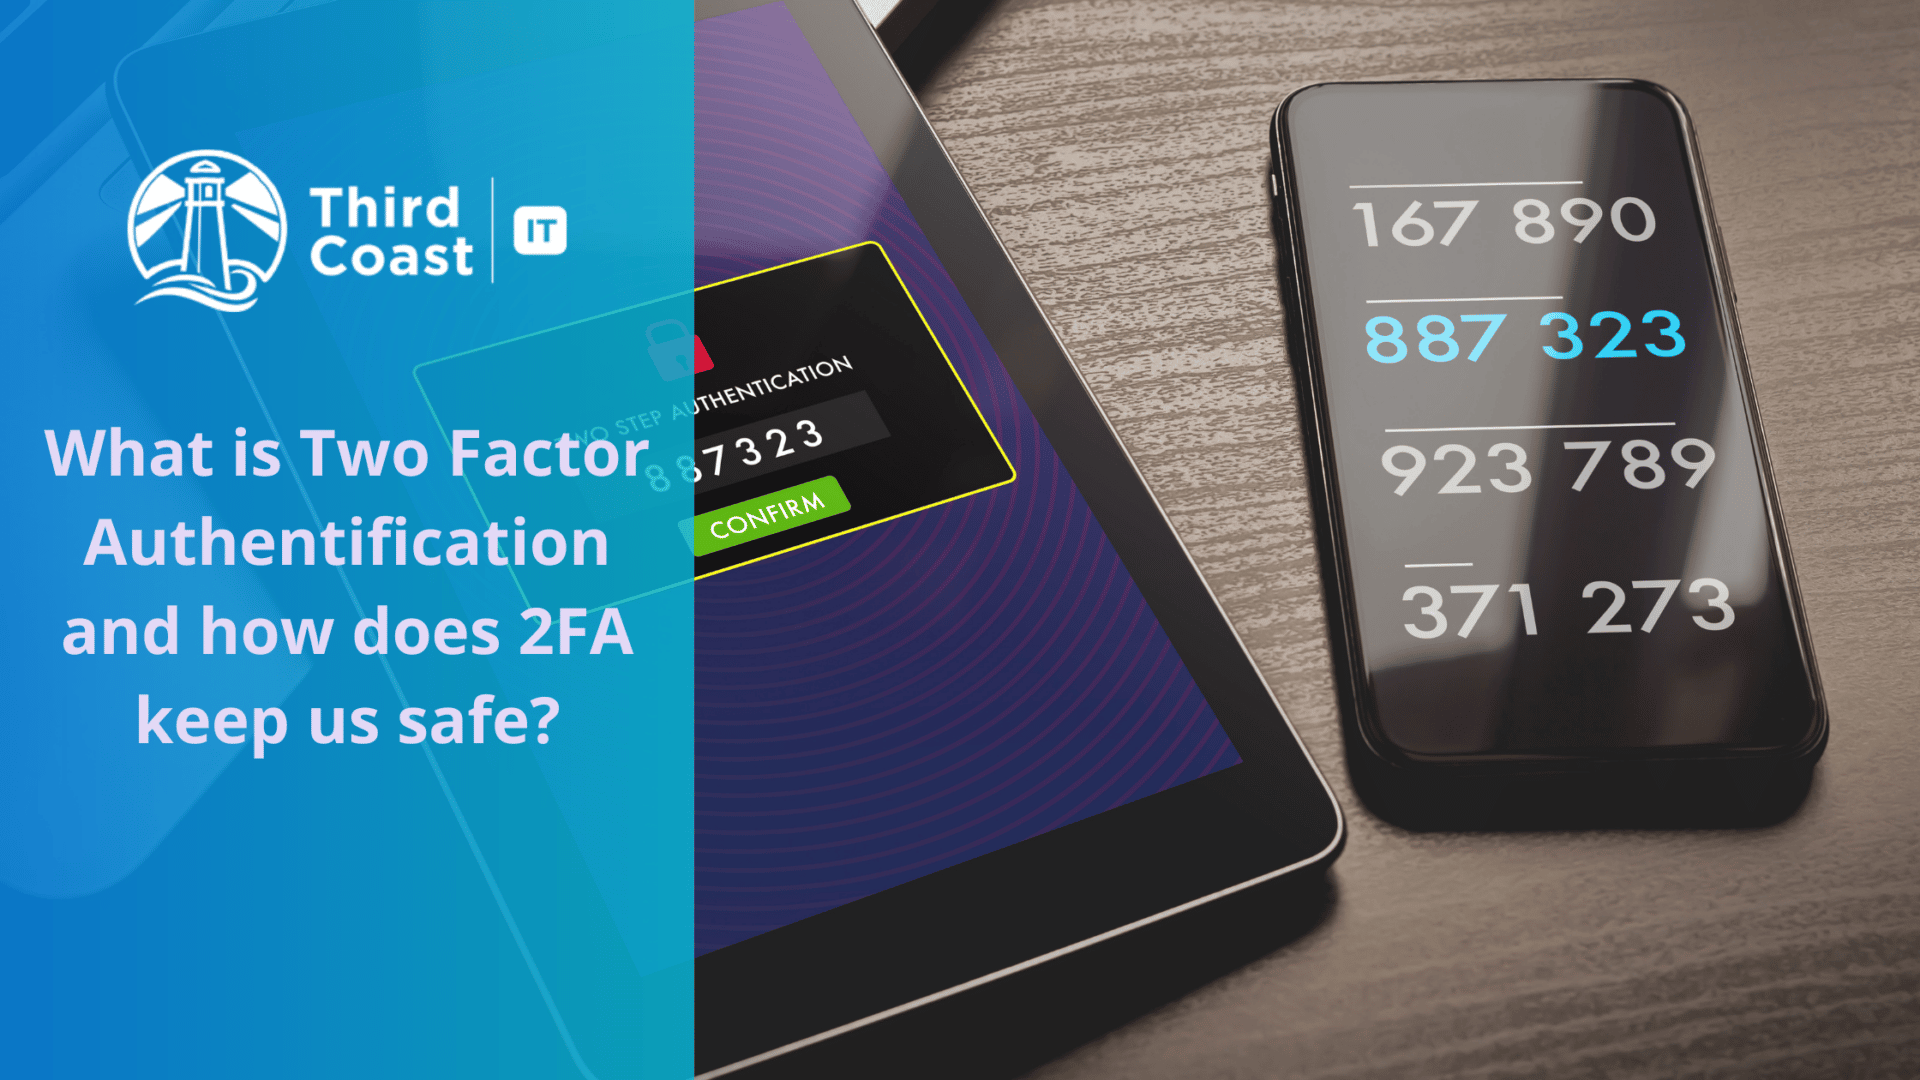 Text reads: what is two factor authentication and why is 2fa important to keep you safe? Image is a cellphone showing a 2Fa code